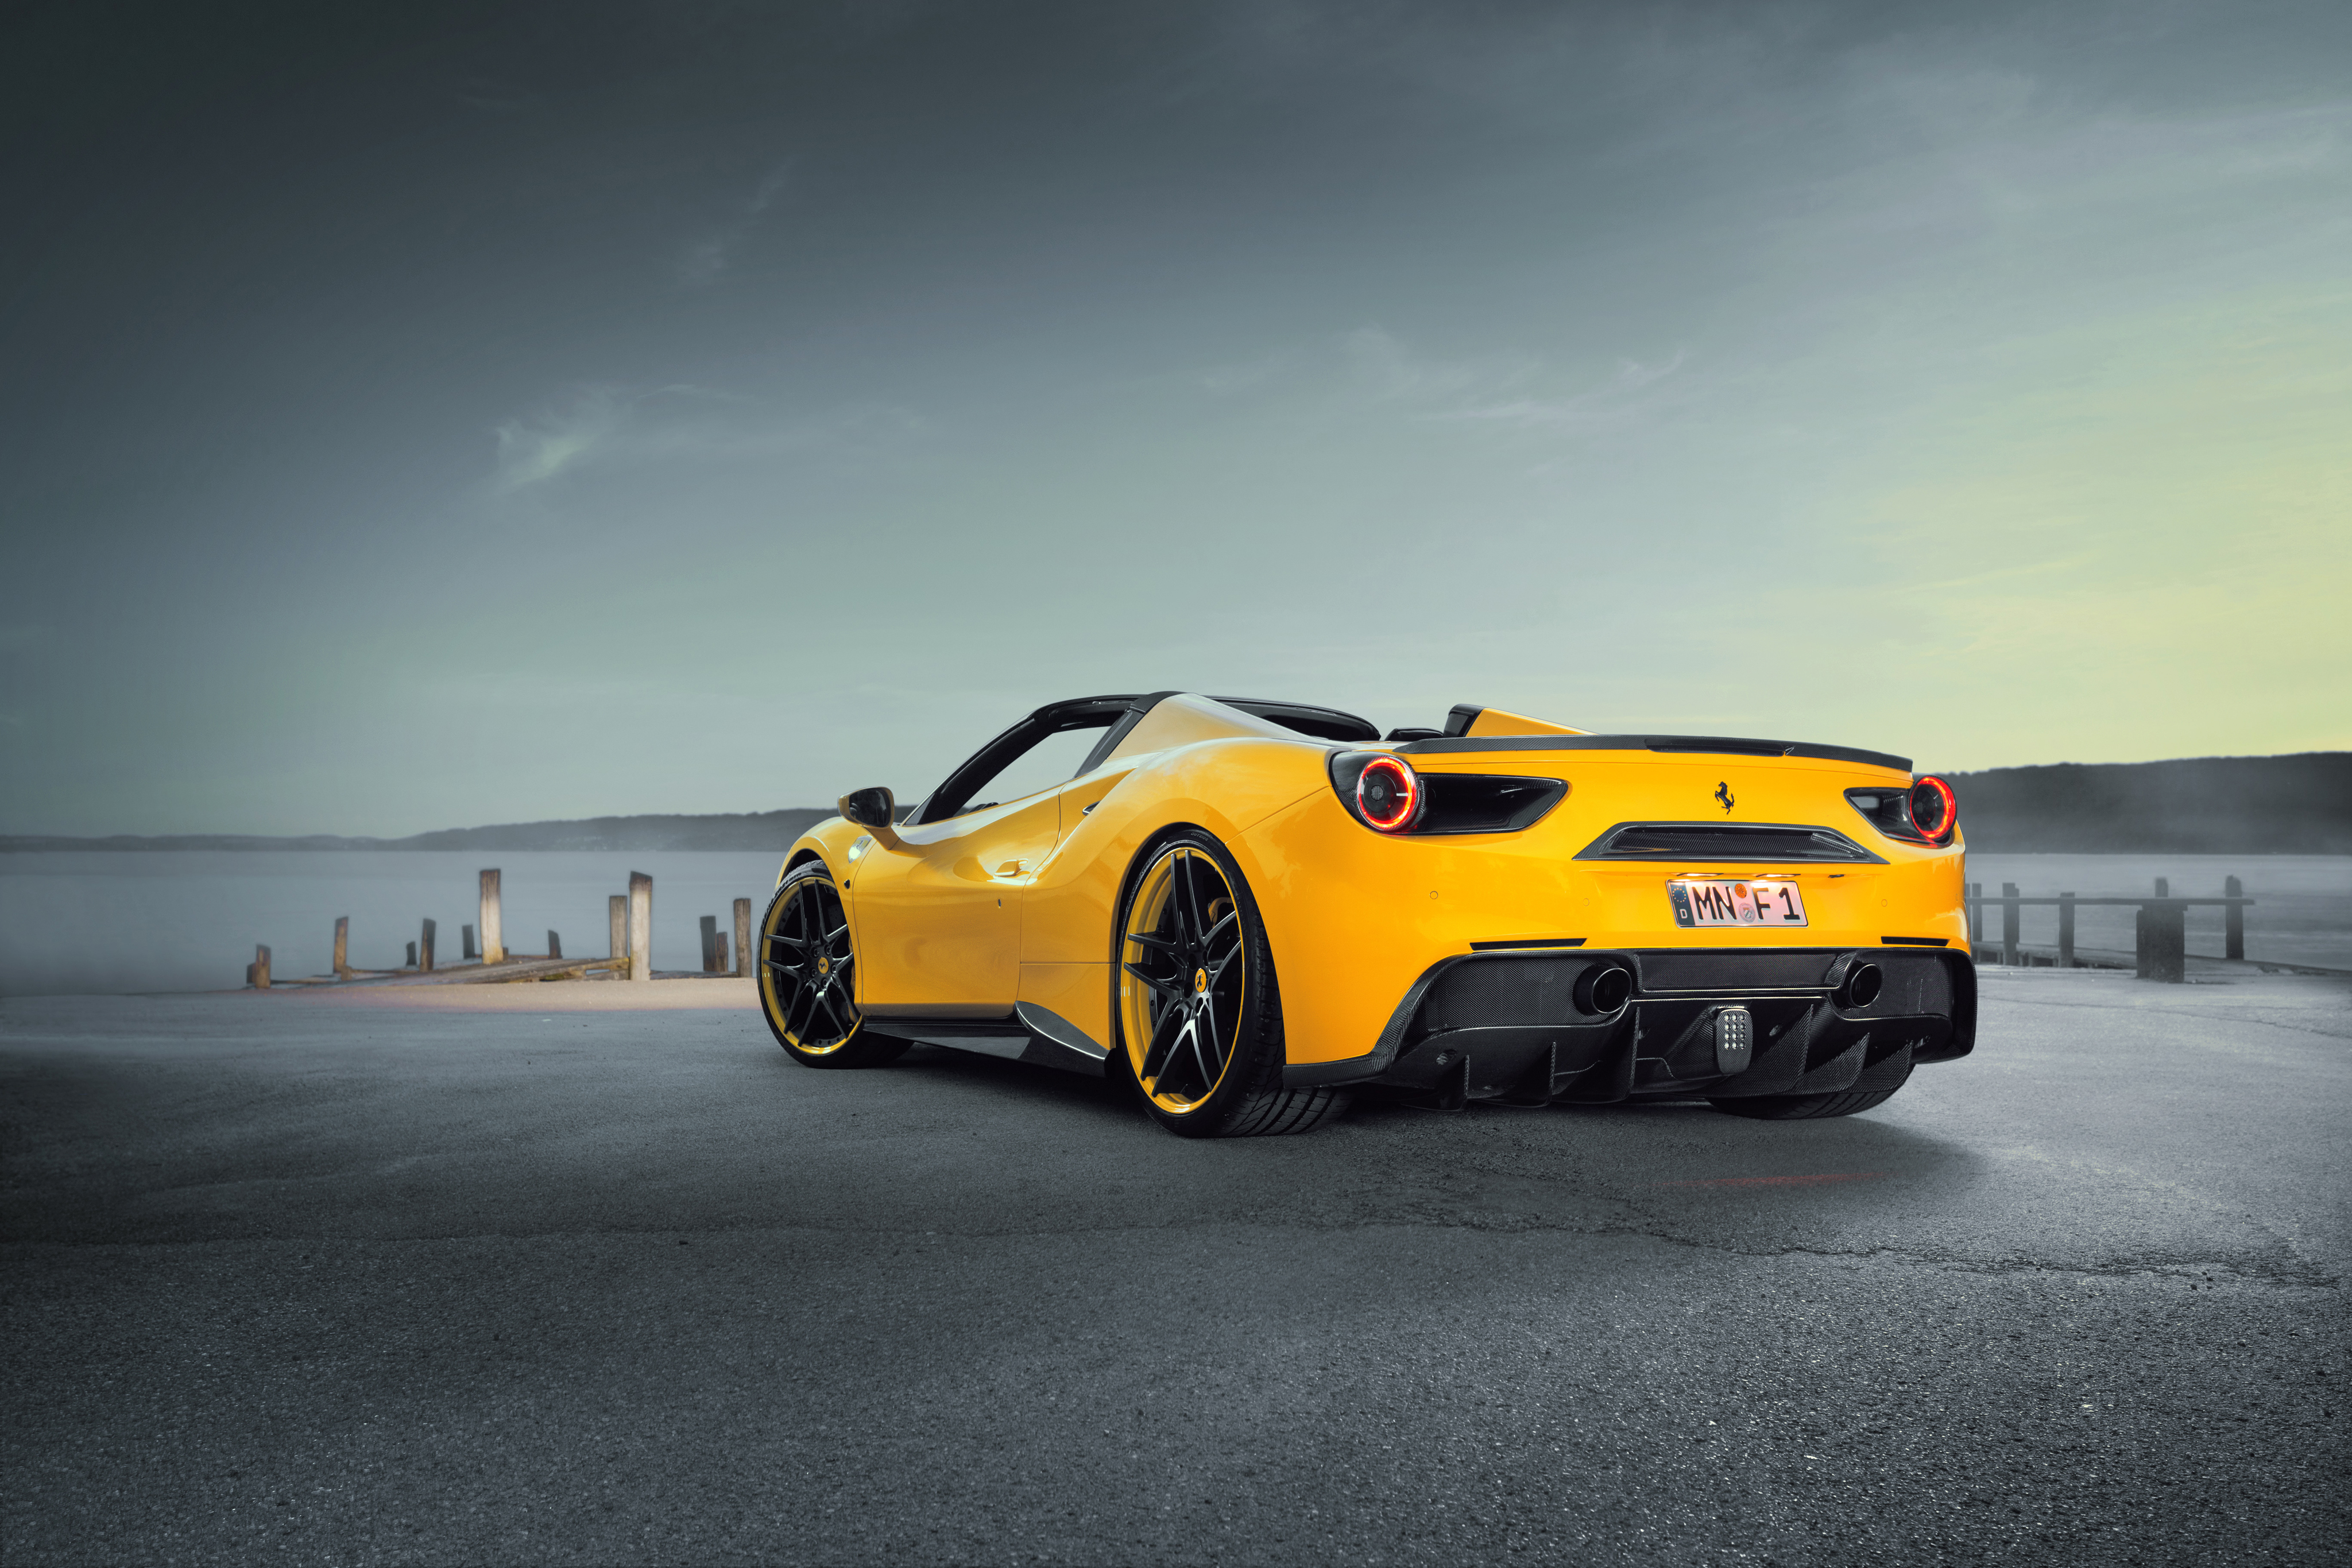 Wallpapers Ferrari 488 Spider yellow a rear view on the desktop